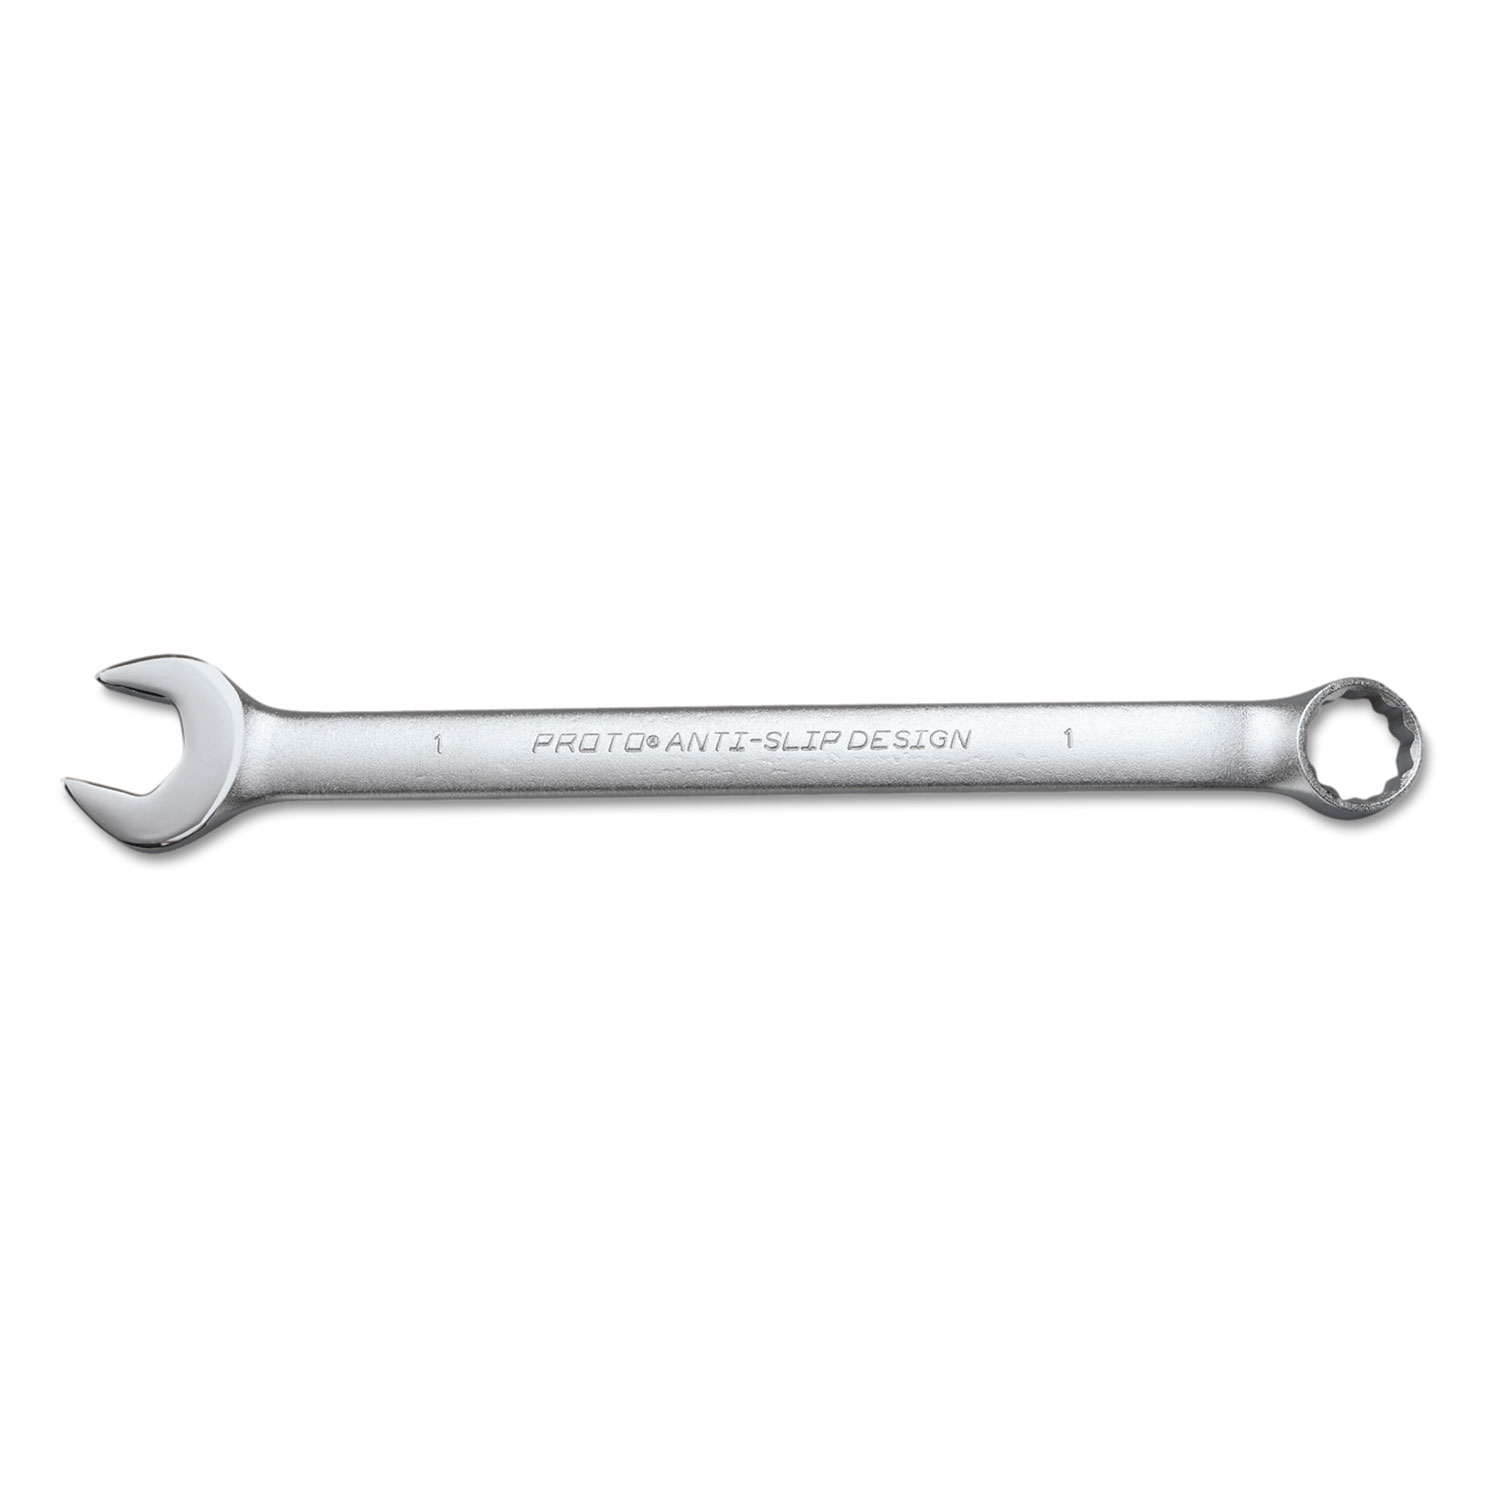 Torqueplus 12-Point Combination Wrench, 1 Opening, Satin Finish